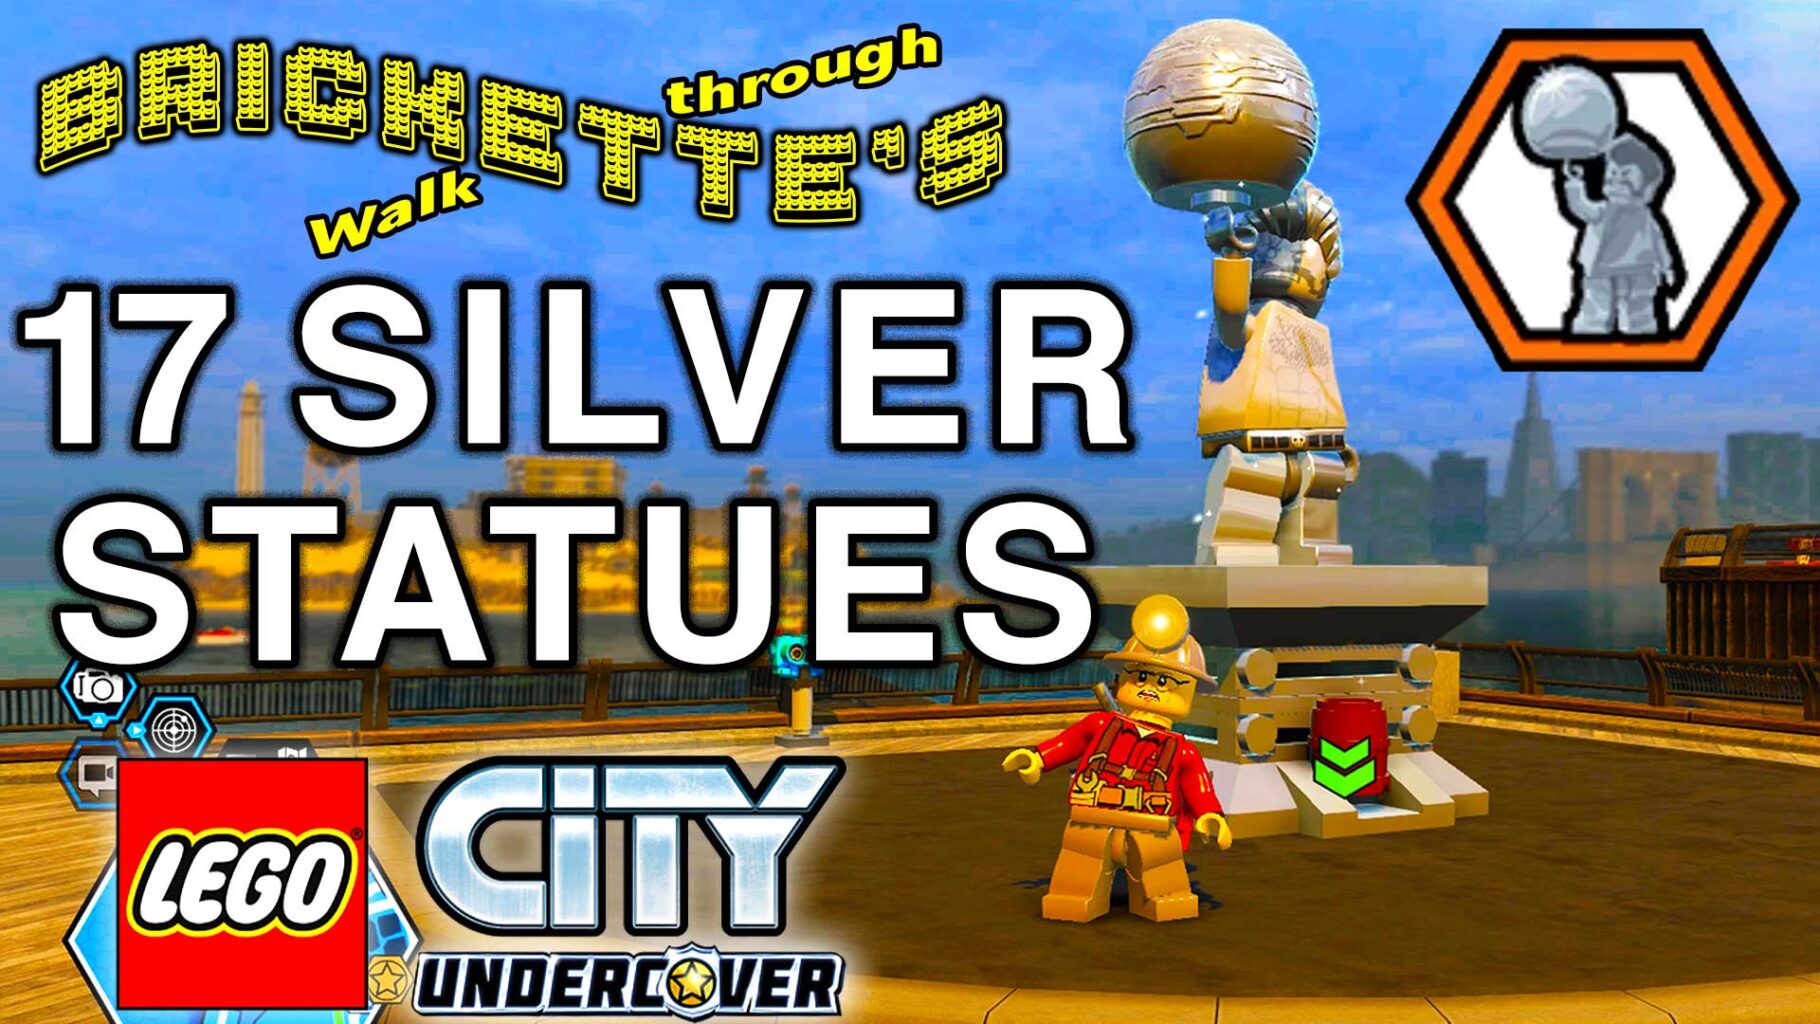 All 17 Silver Statues in LEGO City Undercover